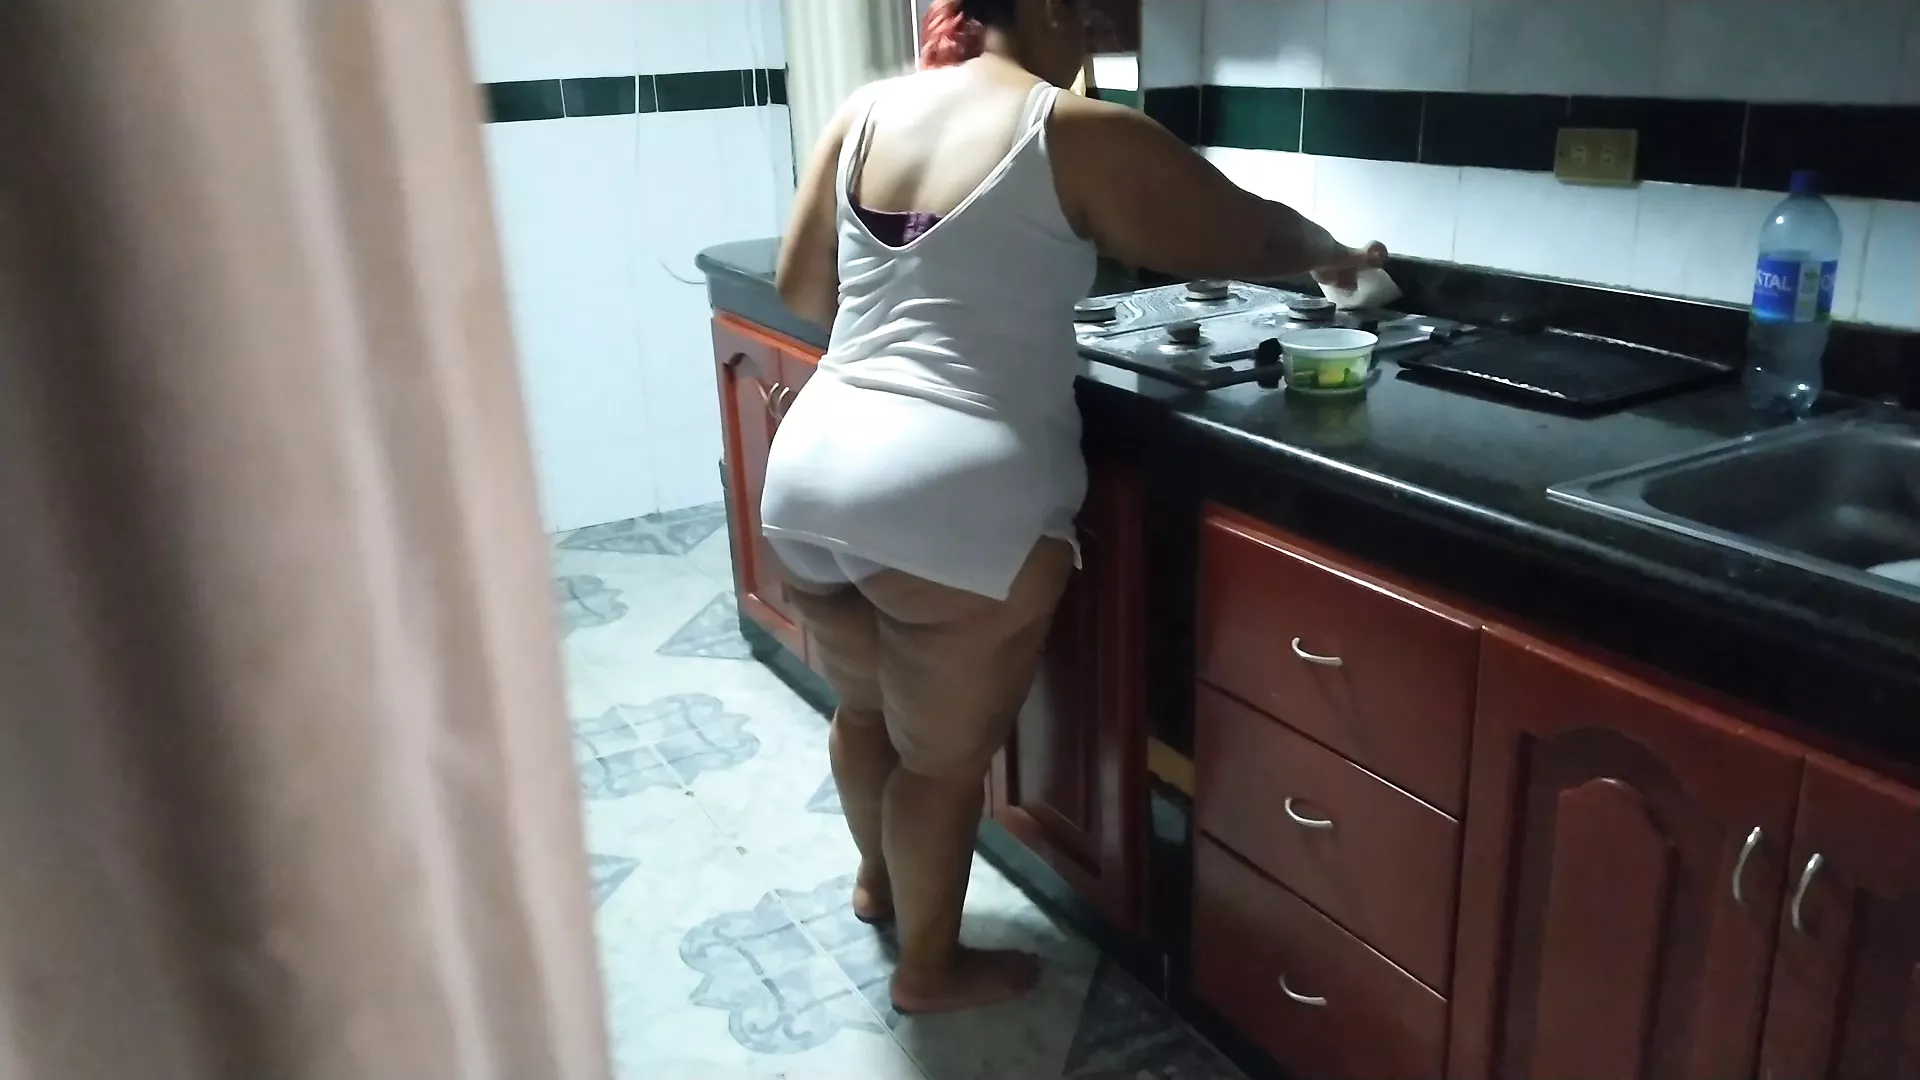 I masturbate while my friends mom cleans the kitchen